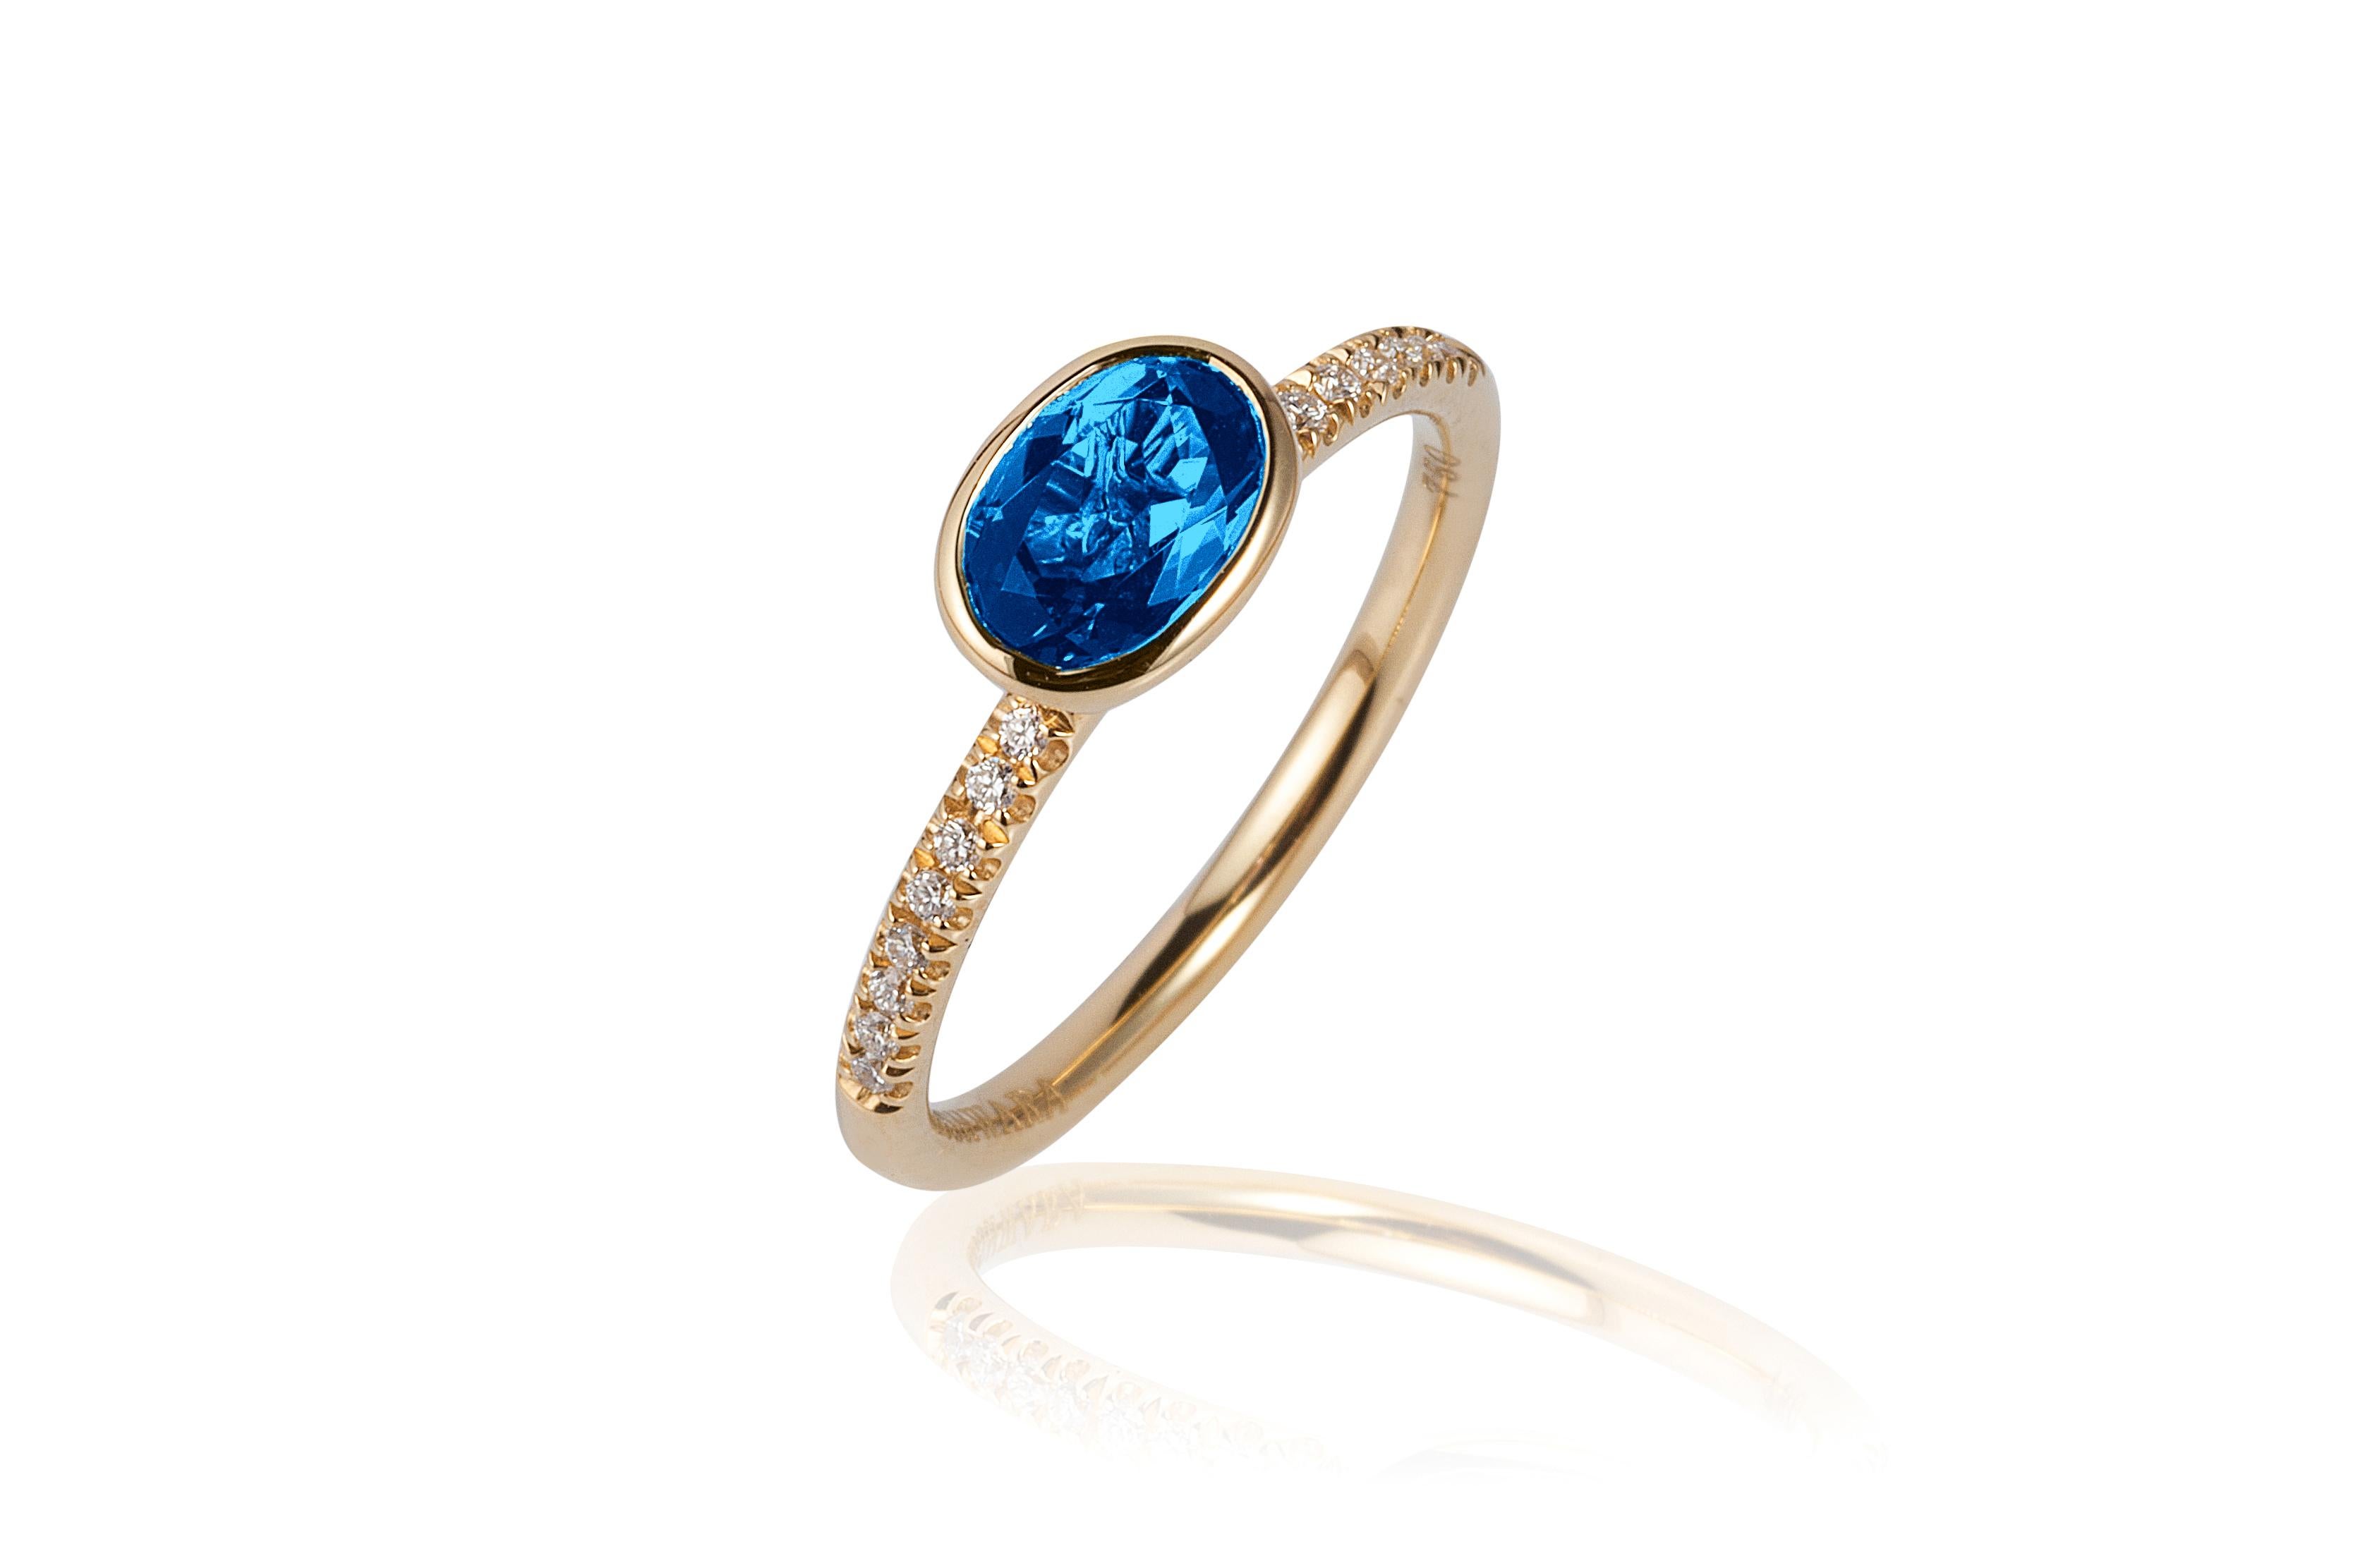 London Blue Topaz Faceted Oval Ring with Diamonds in 18K Yellow Gold, from 'Gossip' Collection
 
 Stone size: 7 x 5 mm
 
 Gemstone Approx. Wt: Blue Topaz- 0.93 Carats
 
 Diamonds: G-H / VS, Approx. Wt: 0.08 Carats